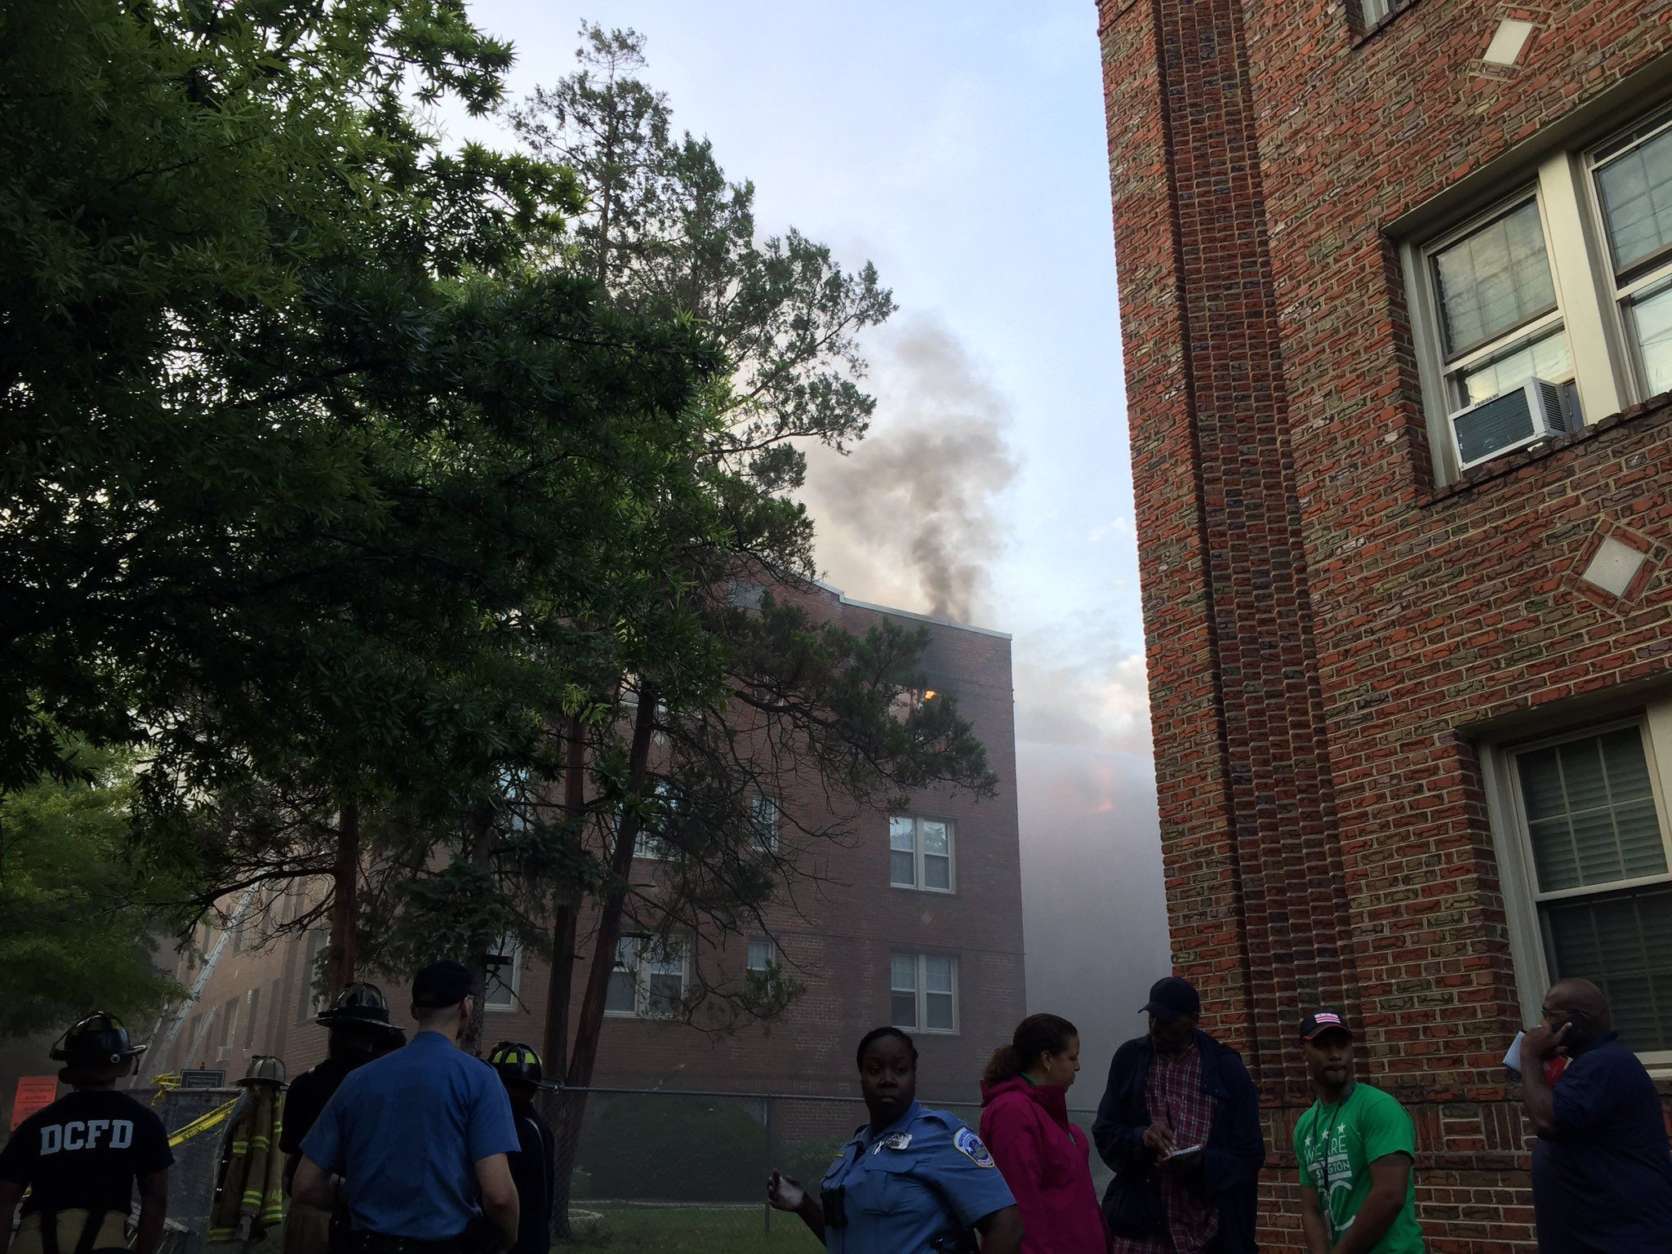 The Red Cross was on the scene to assist displaced residents. (WTOP/Dennis Foley)